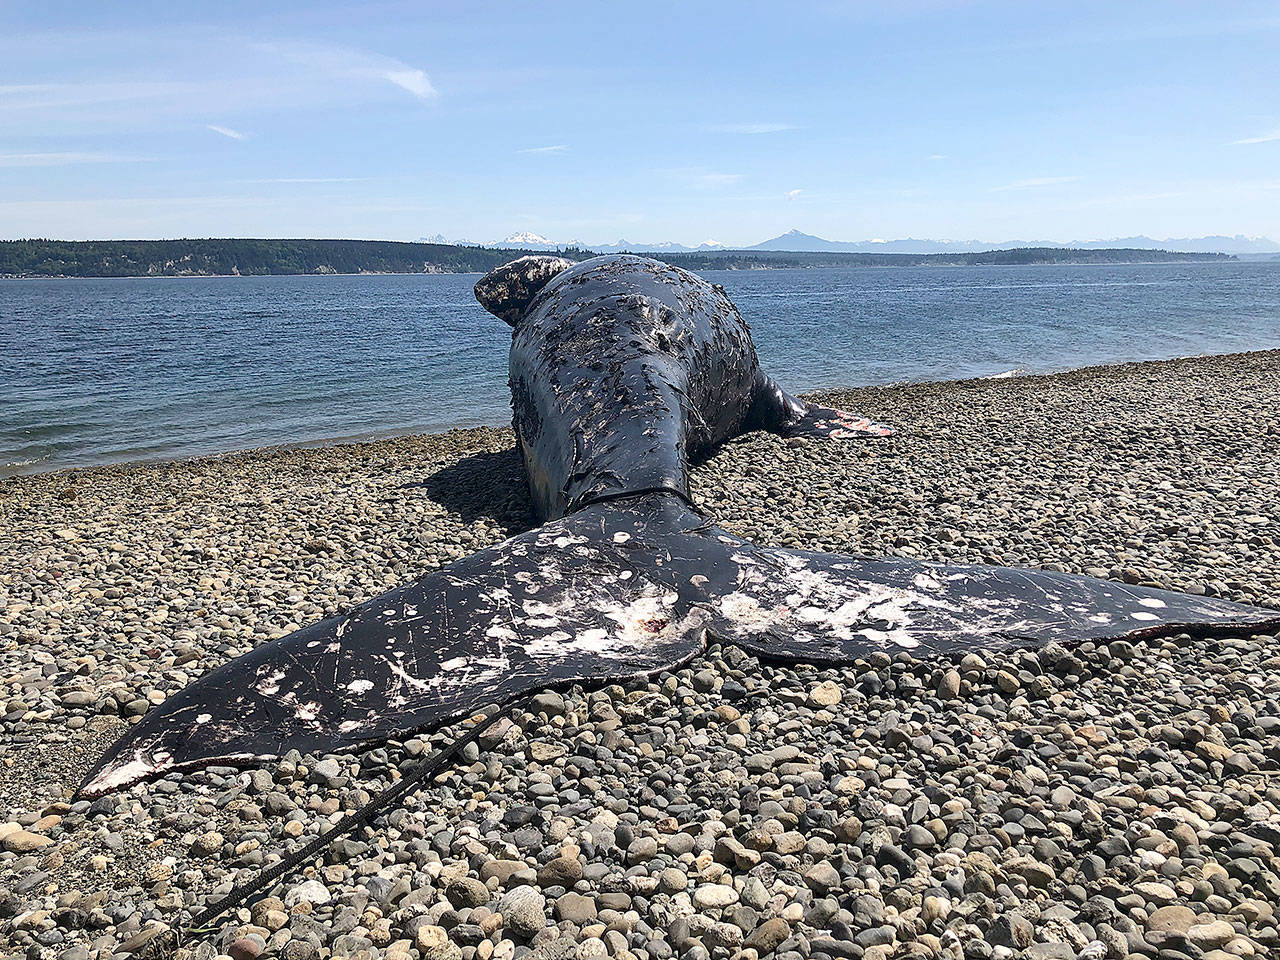 An examination revealed the dead gray whale that washed ashore near Harborview Park in Everett in early May died of starvation. (Washington Department of Fish and Wildlife)